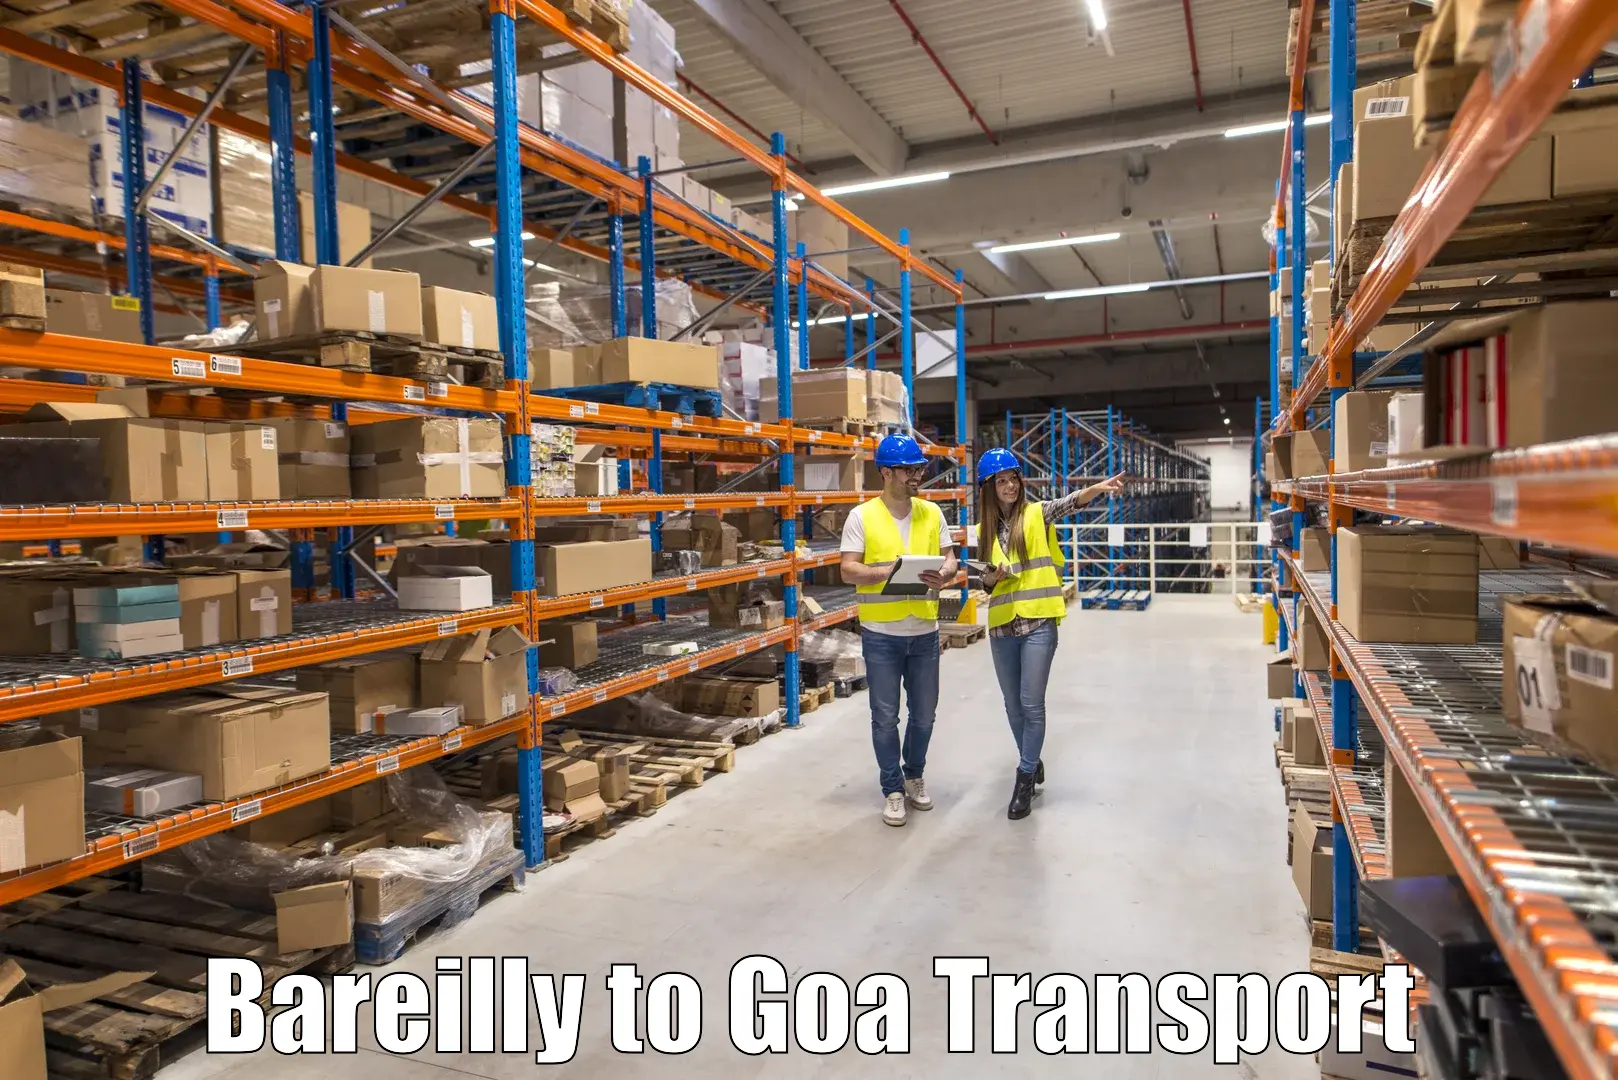 Nearby transport service Bareilly to Goa